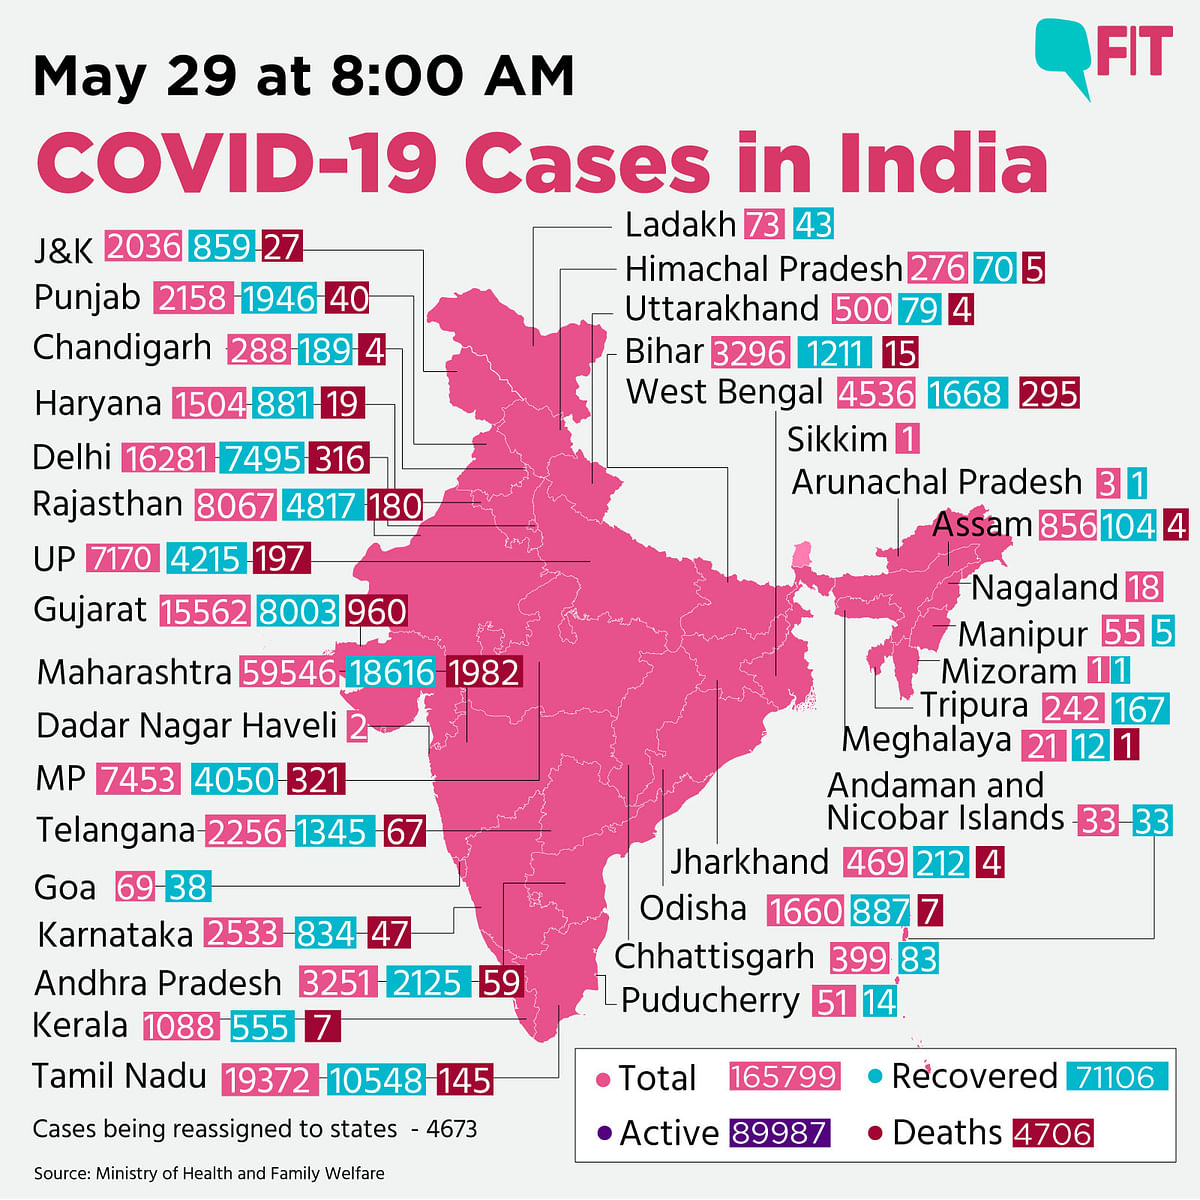 COVID-19 India: Highest Single-Day Spike, Surpasses China Deaths